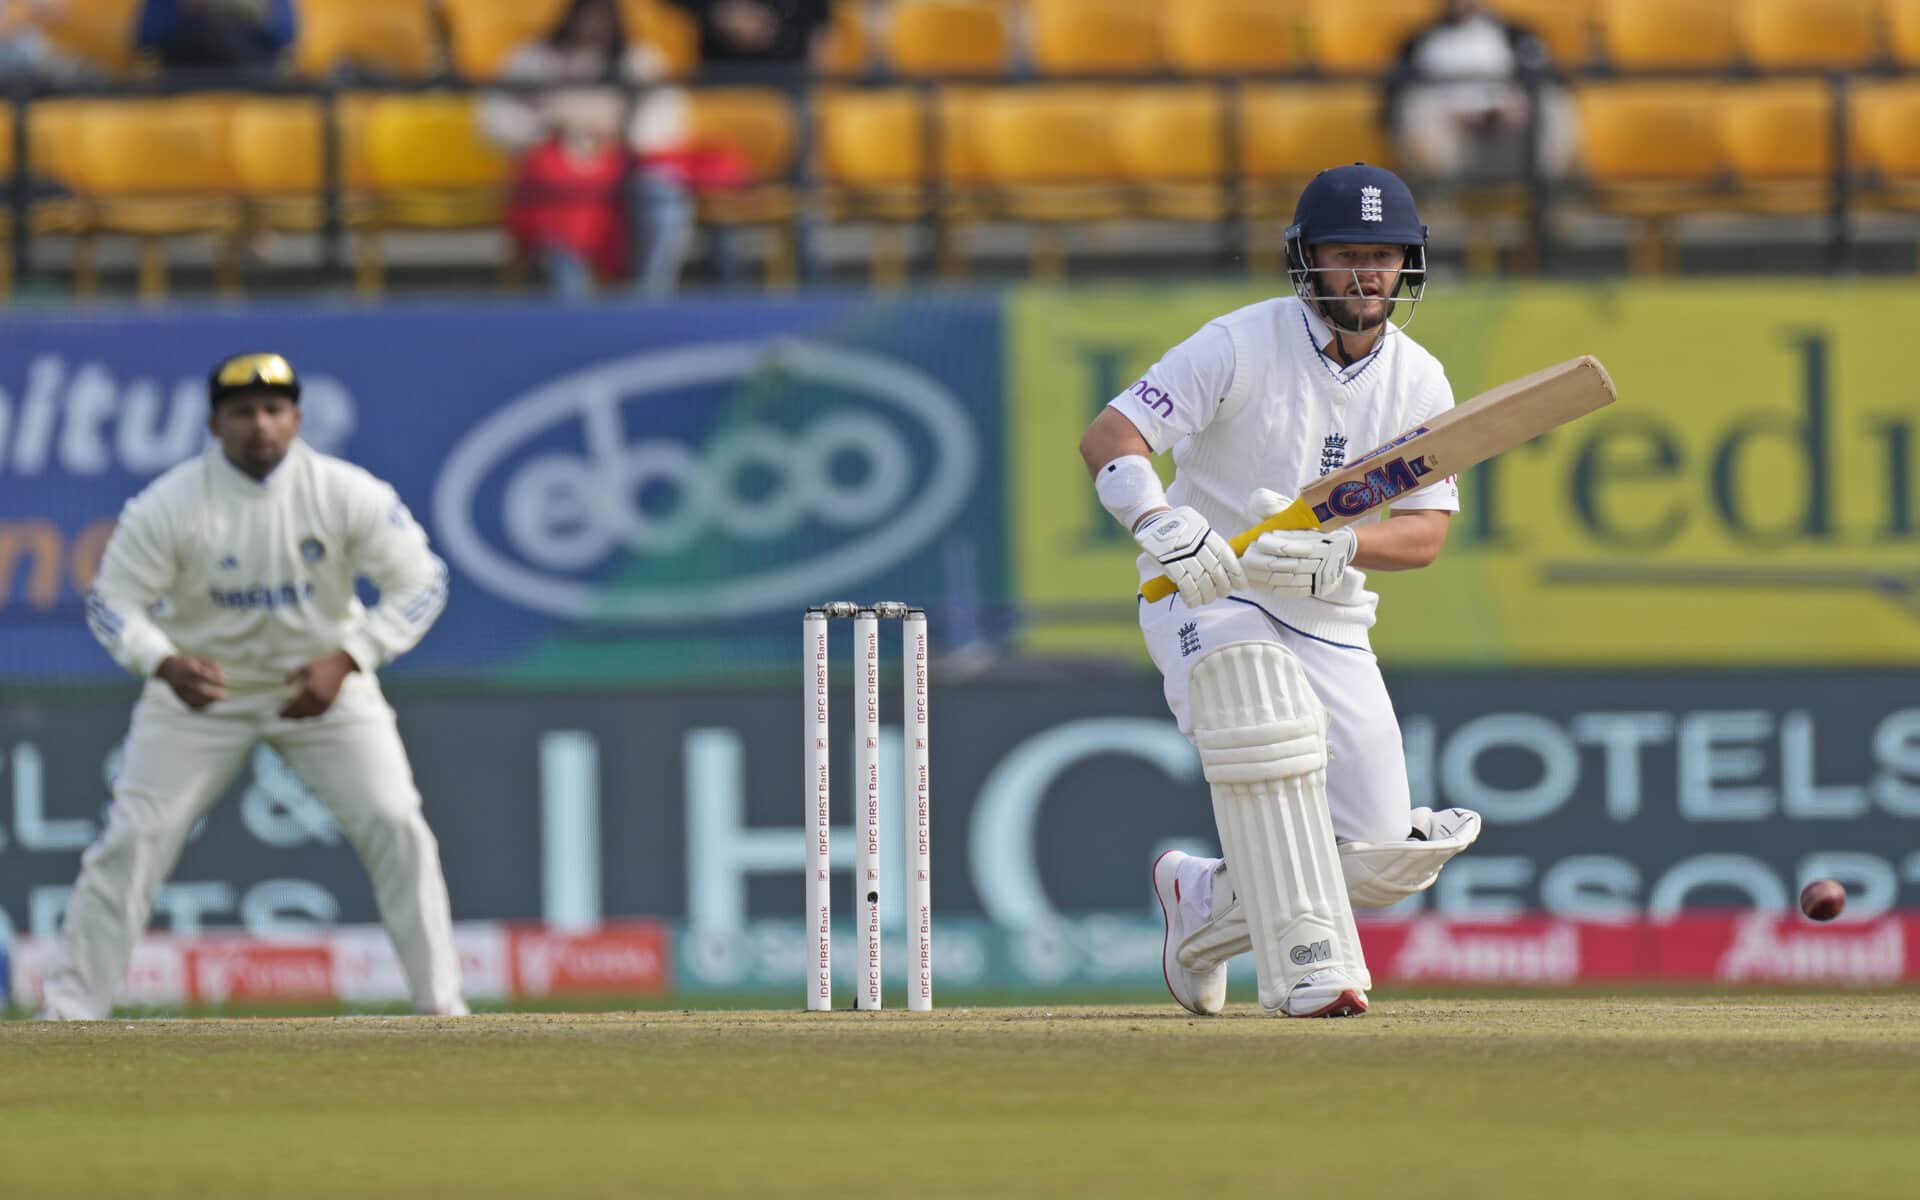 Ben Duckett is taking his time against pace (Source: AP Photo)